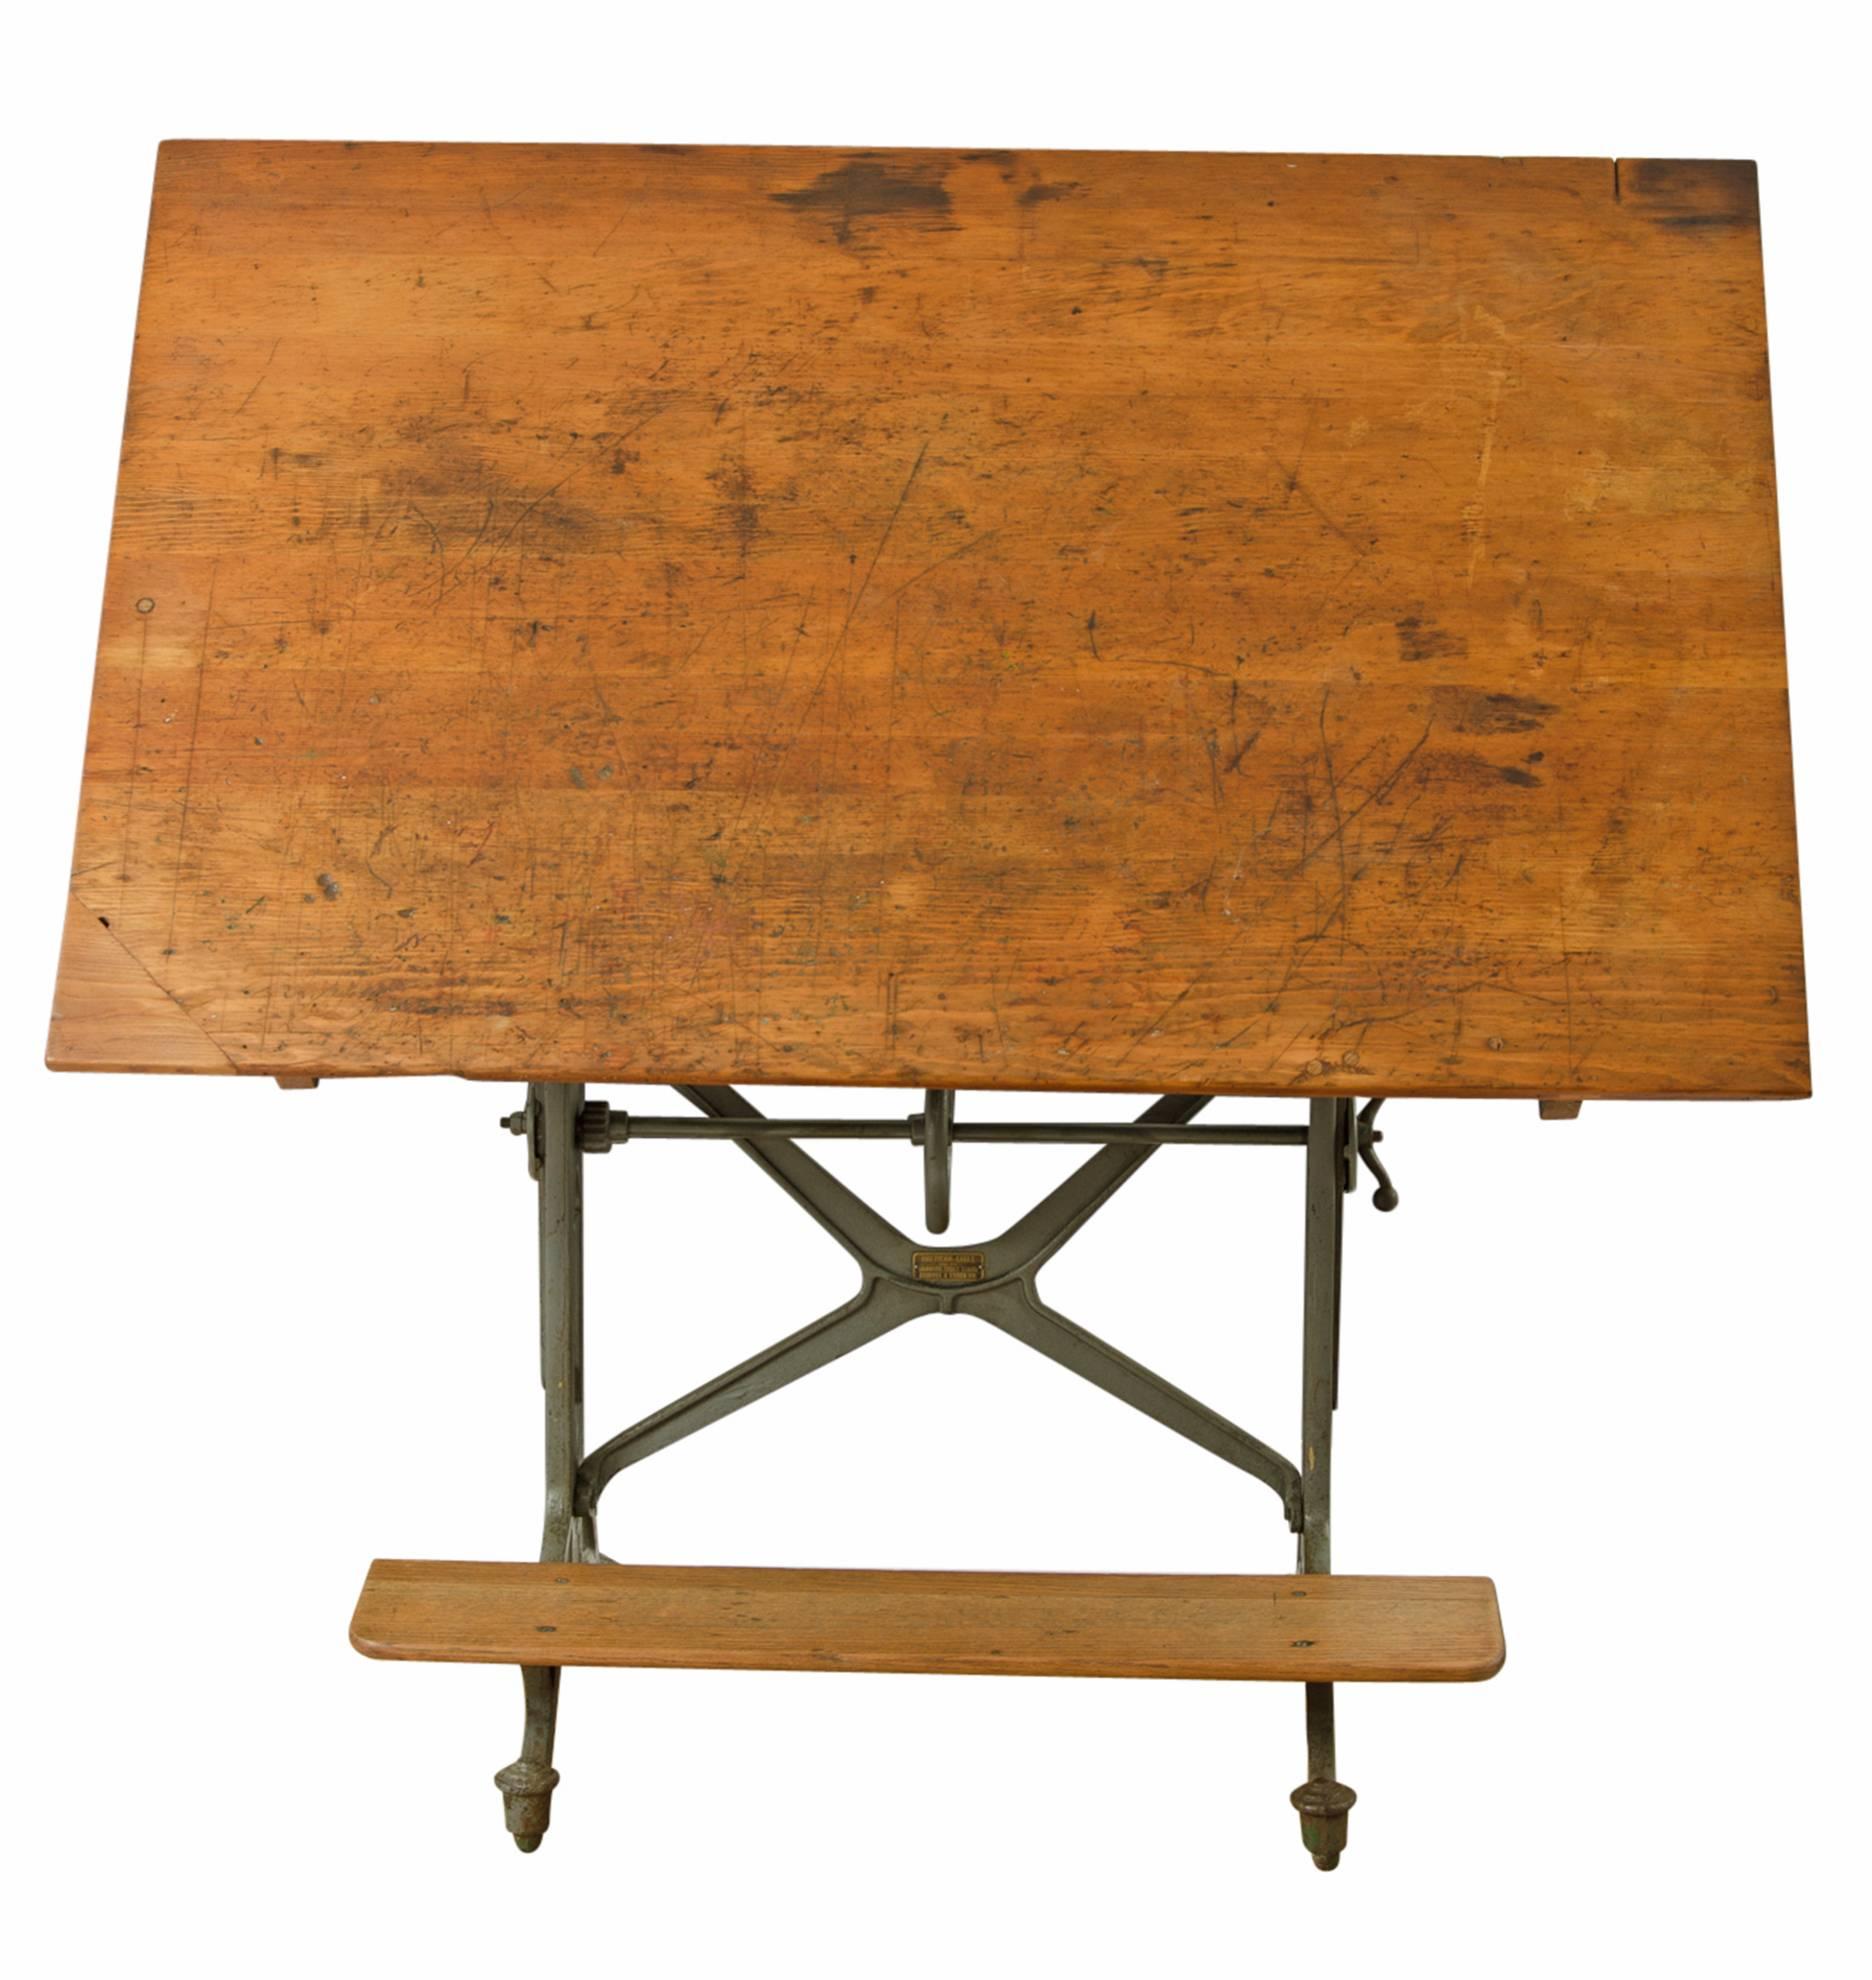 Comprising wood or iron trestle bases and a beautifully worn work surfaces, our hard-working vintage drafting tables hail from turn of the century engineer’s offices, architect’s studios and Mid-Century classrooms. Today, they are ready to get down